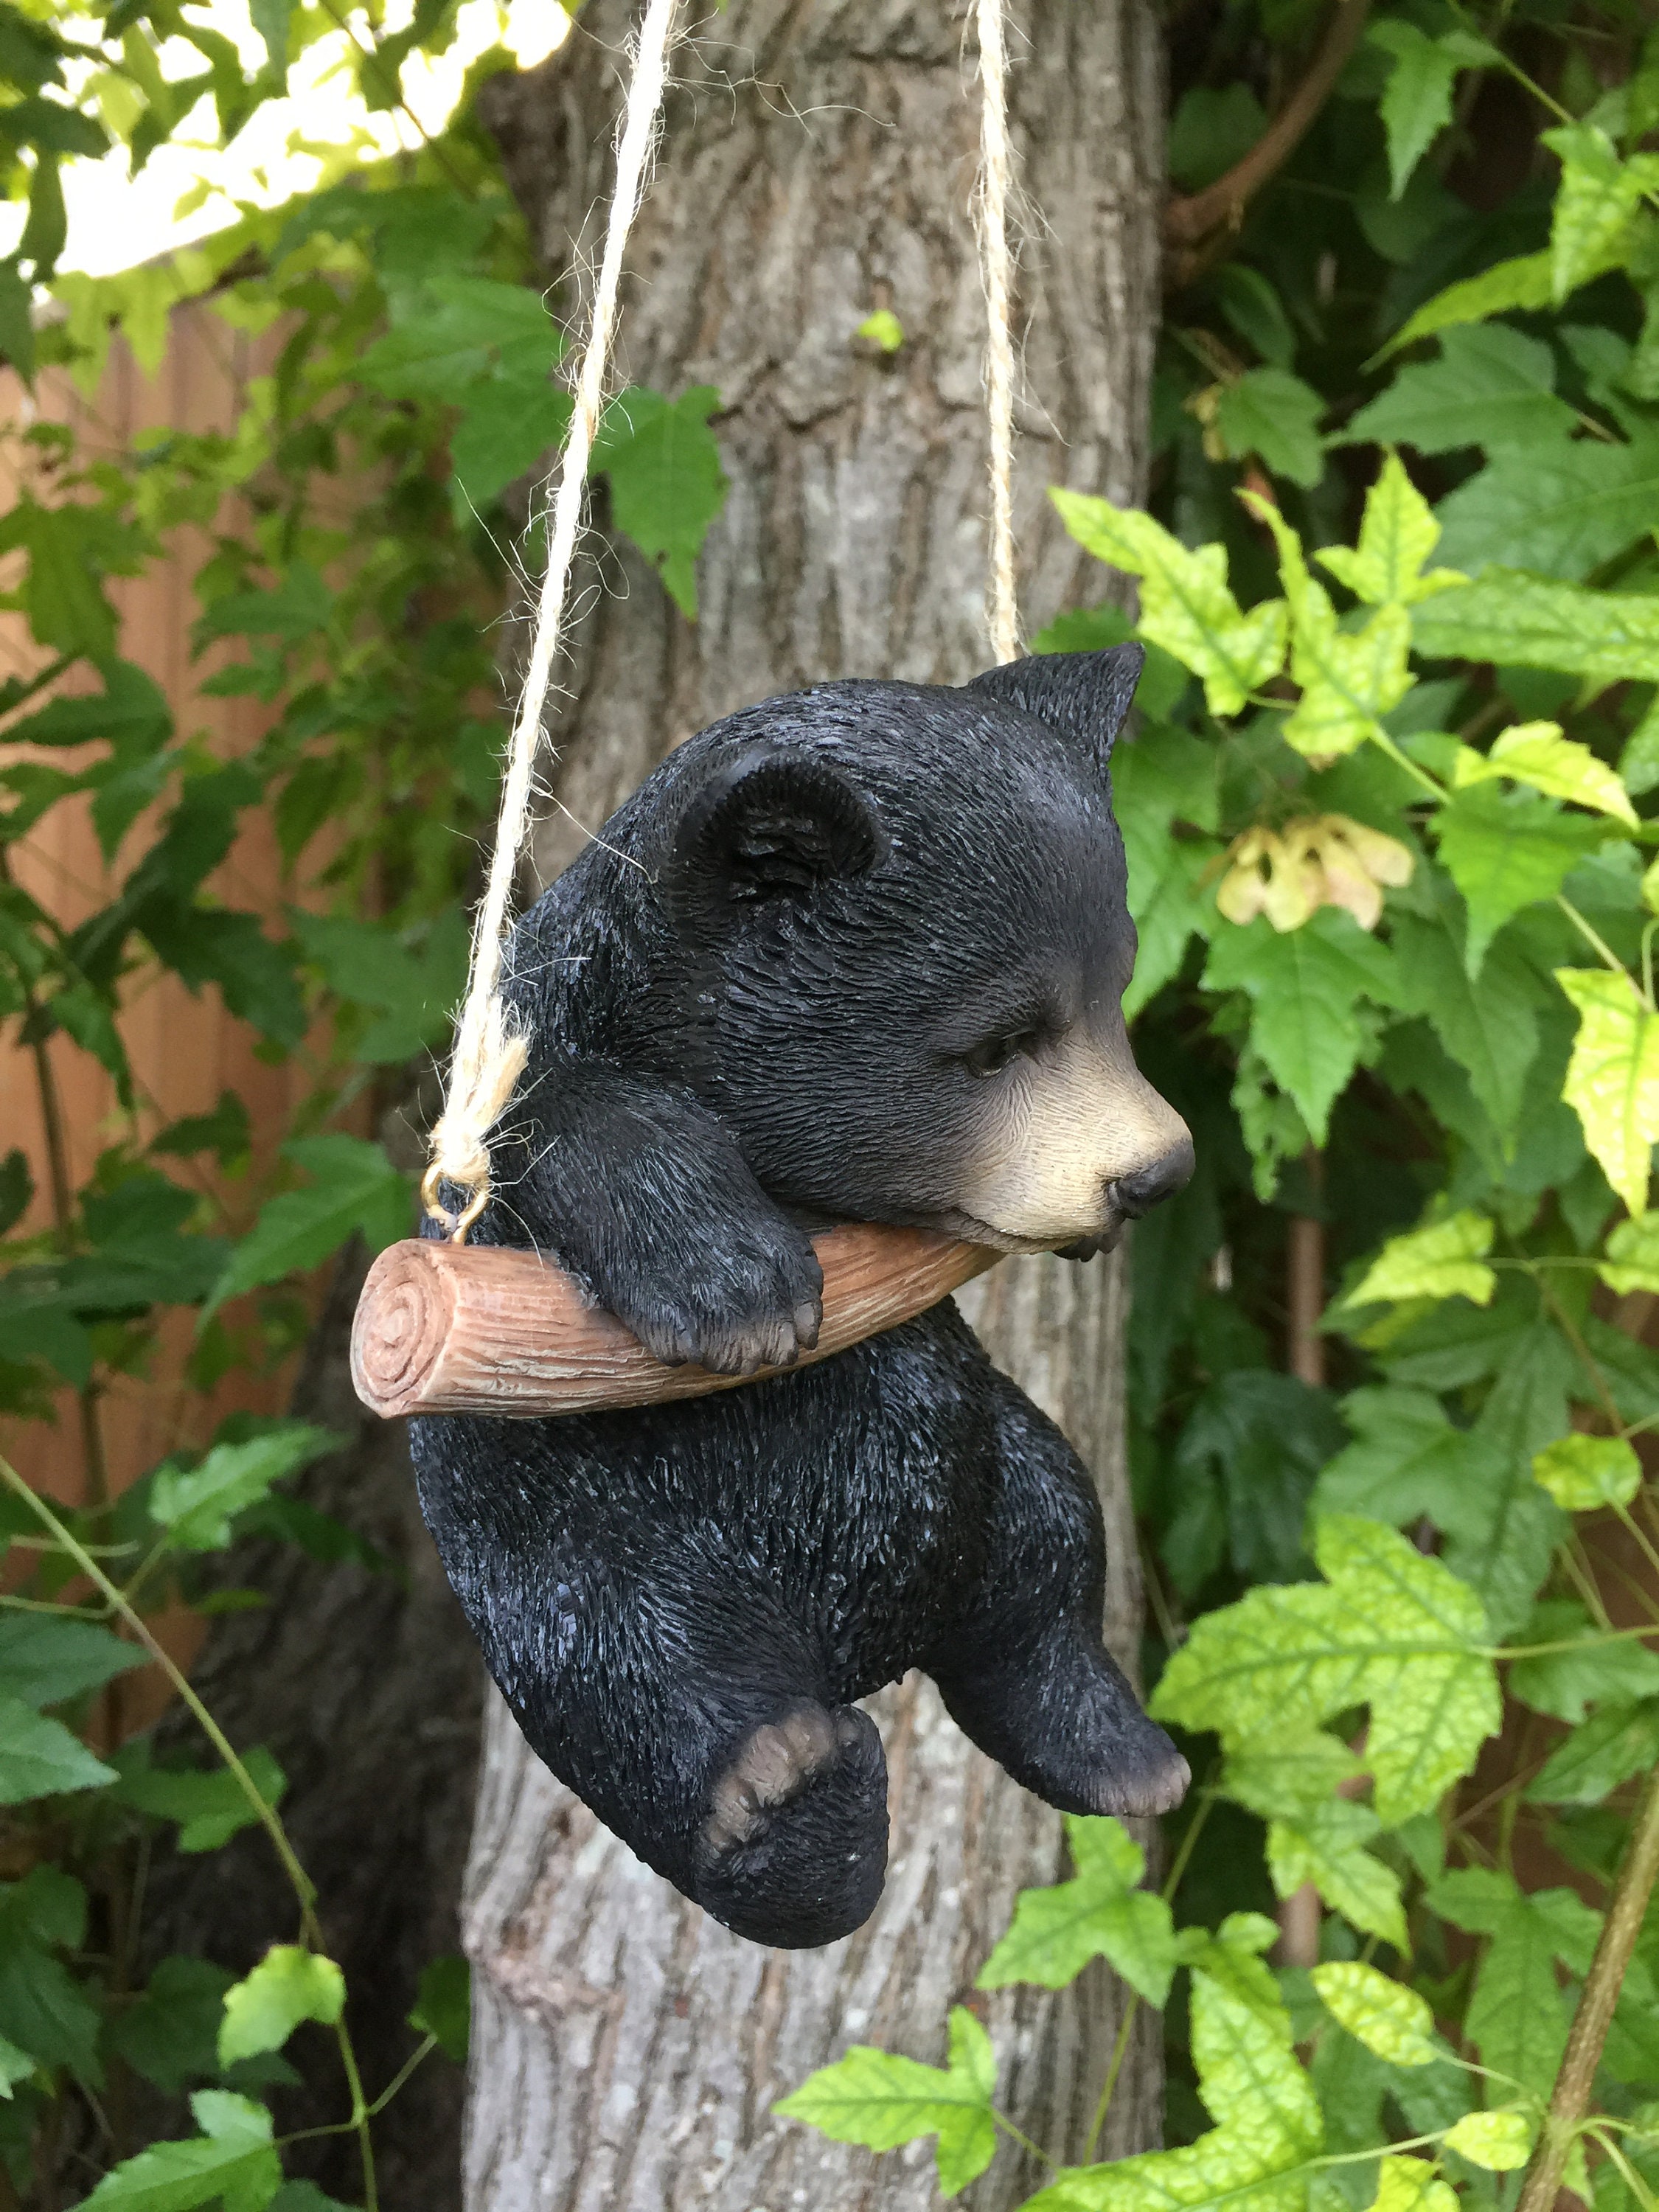 Black Bear Cub Figurine Hanging Out in Tree / Cottage Cabin Ornament/ Bear  Lovers/ Black Bear Statue/cute Baby Black Bear 5.5 in X 3.4 In. 